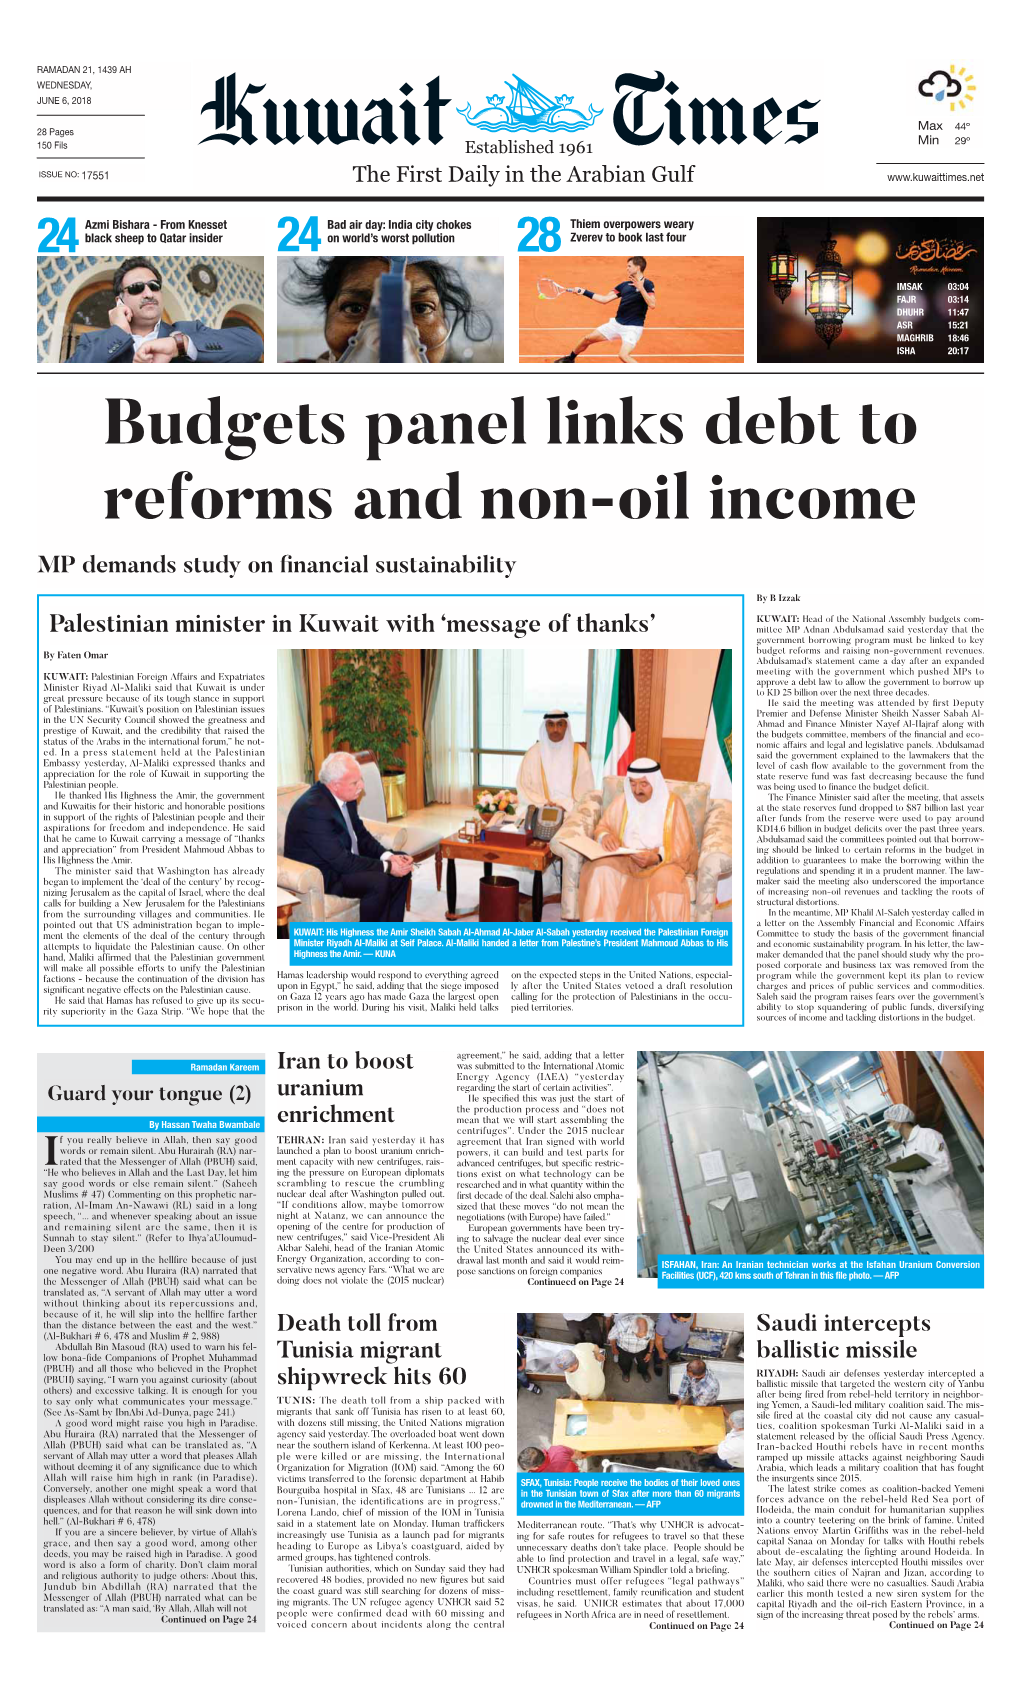 Budgets Panel Links Debt to Reforms and Non-Oil Income MP Demands Study on Financial Sustainability